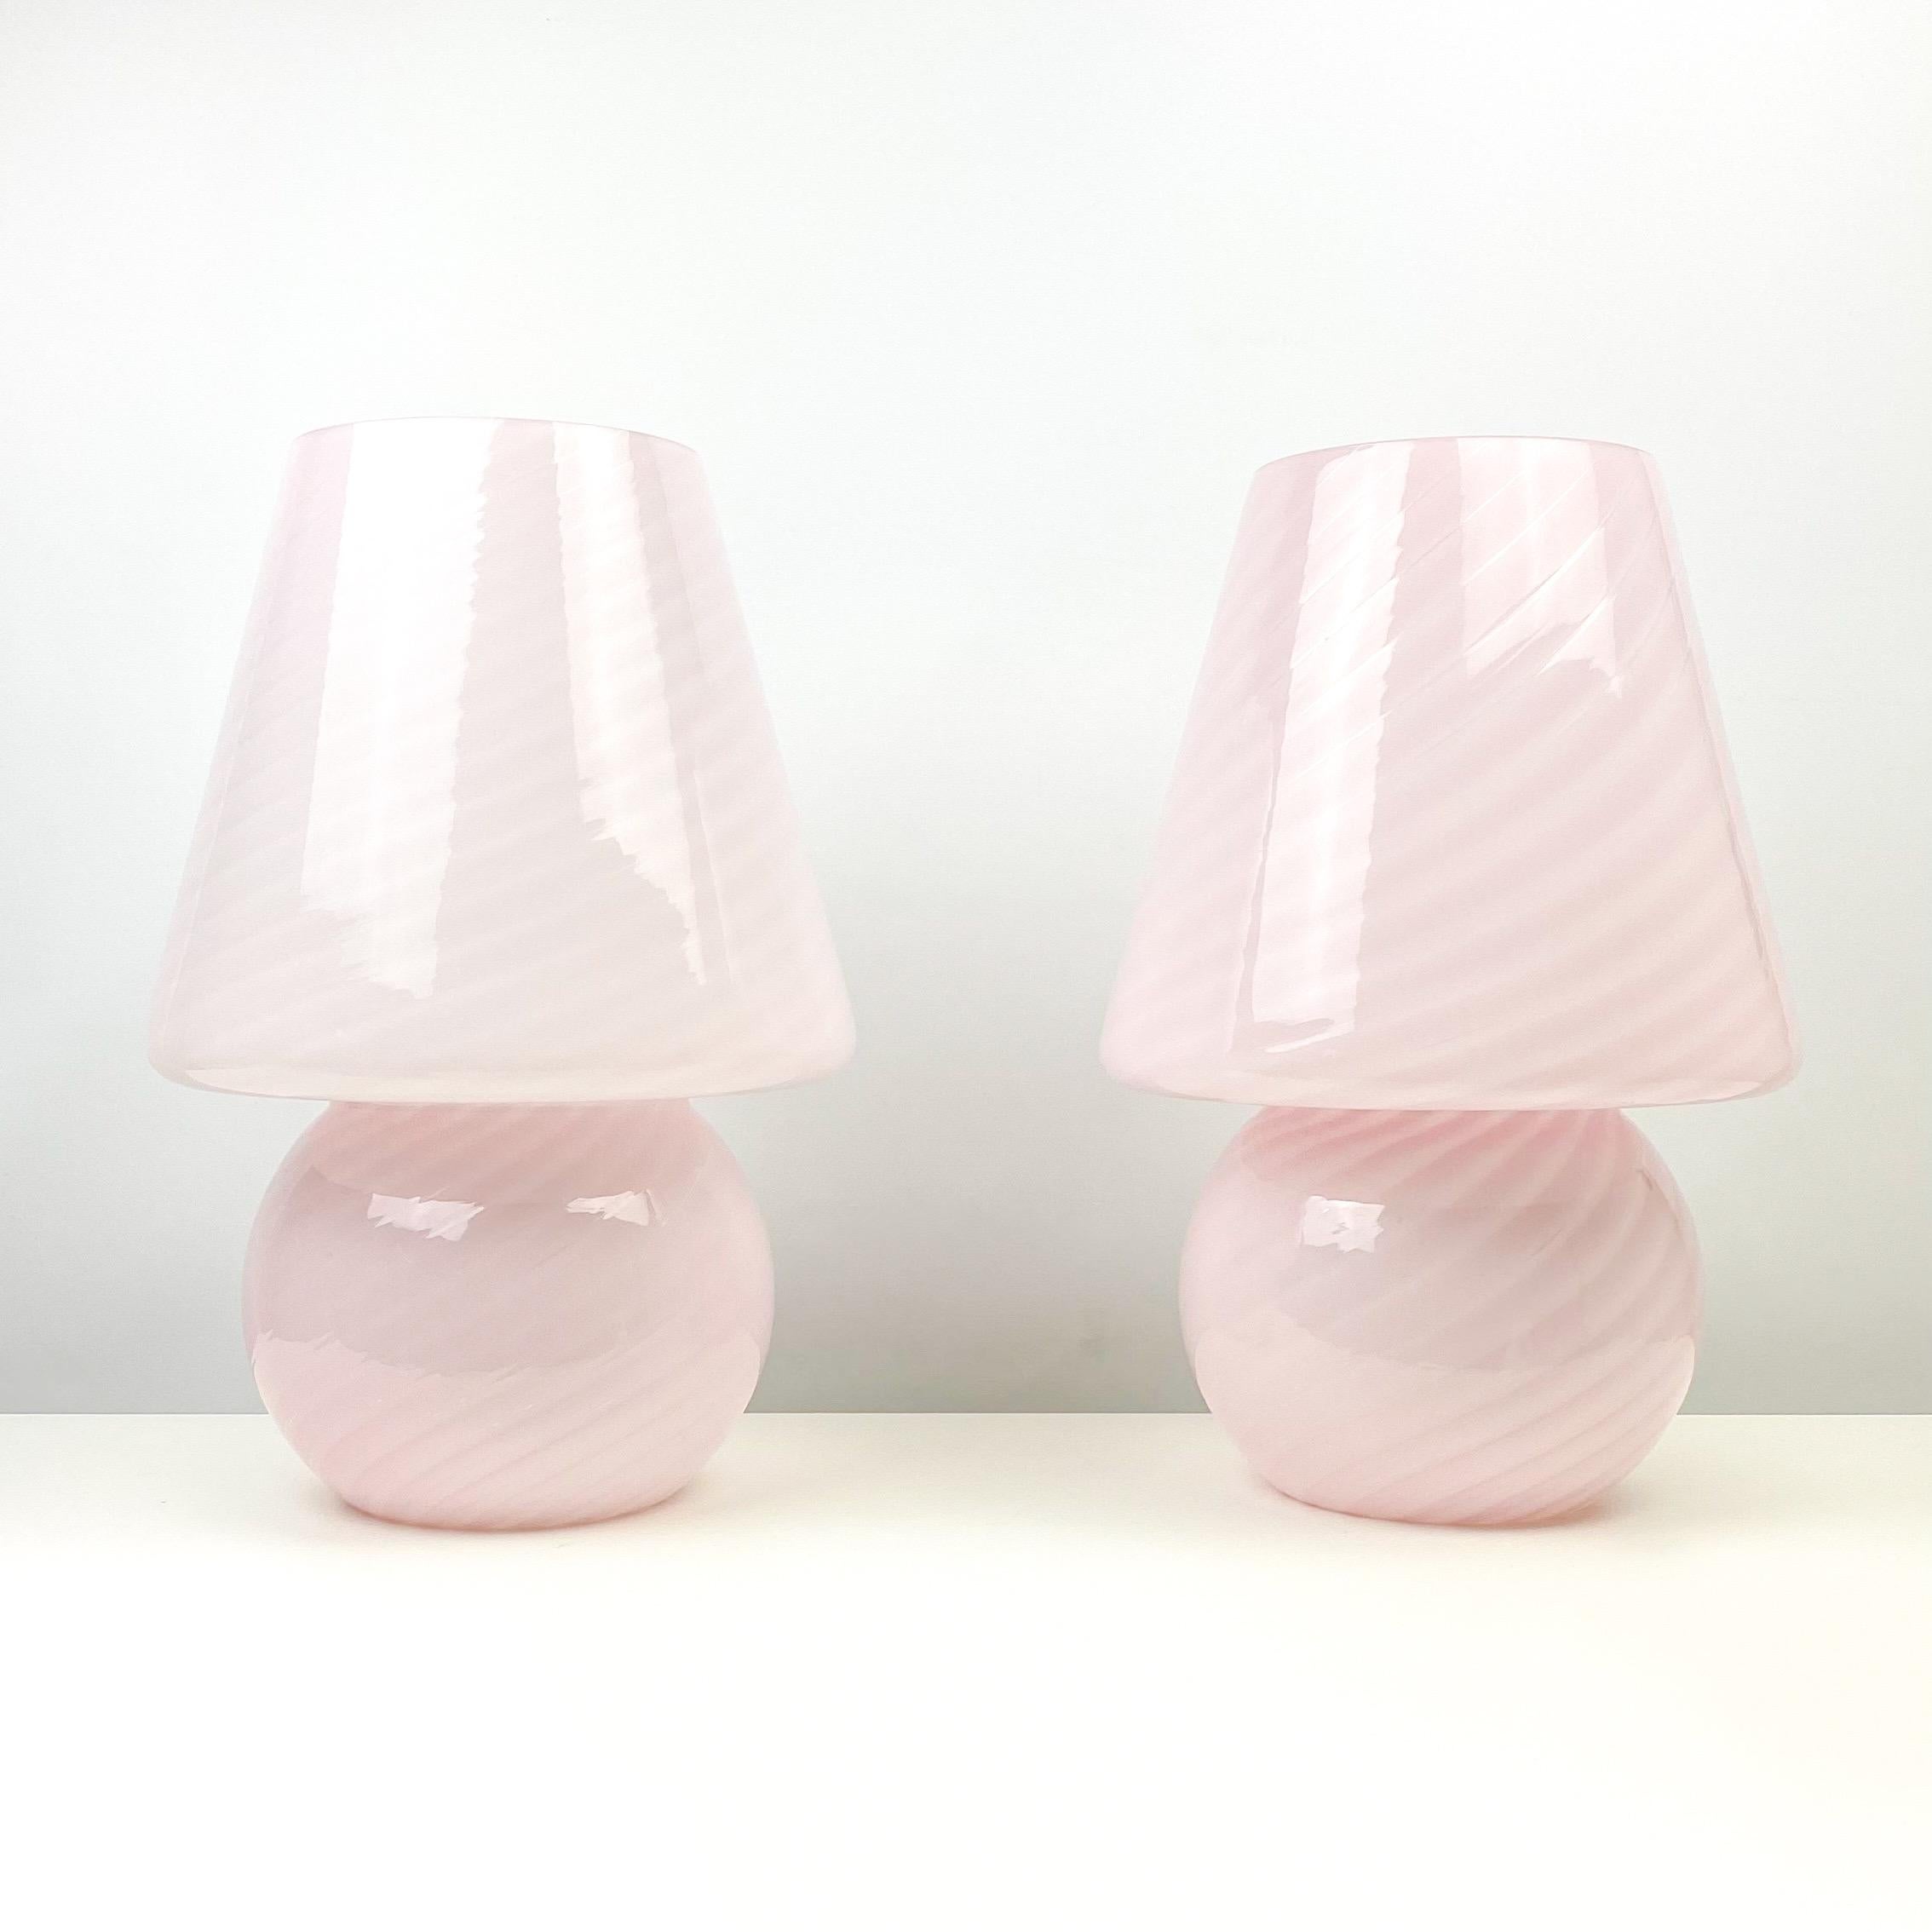 Vintage circa 1970s Vetri Murano mushroom pair of lamps.
Pink and white swirl Murano glass.
Lamps are both marked with makers label.
These are the XL version of these lamps please look at image with soup can for scale.
Sold as a pair only.